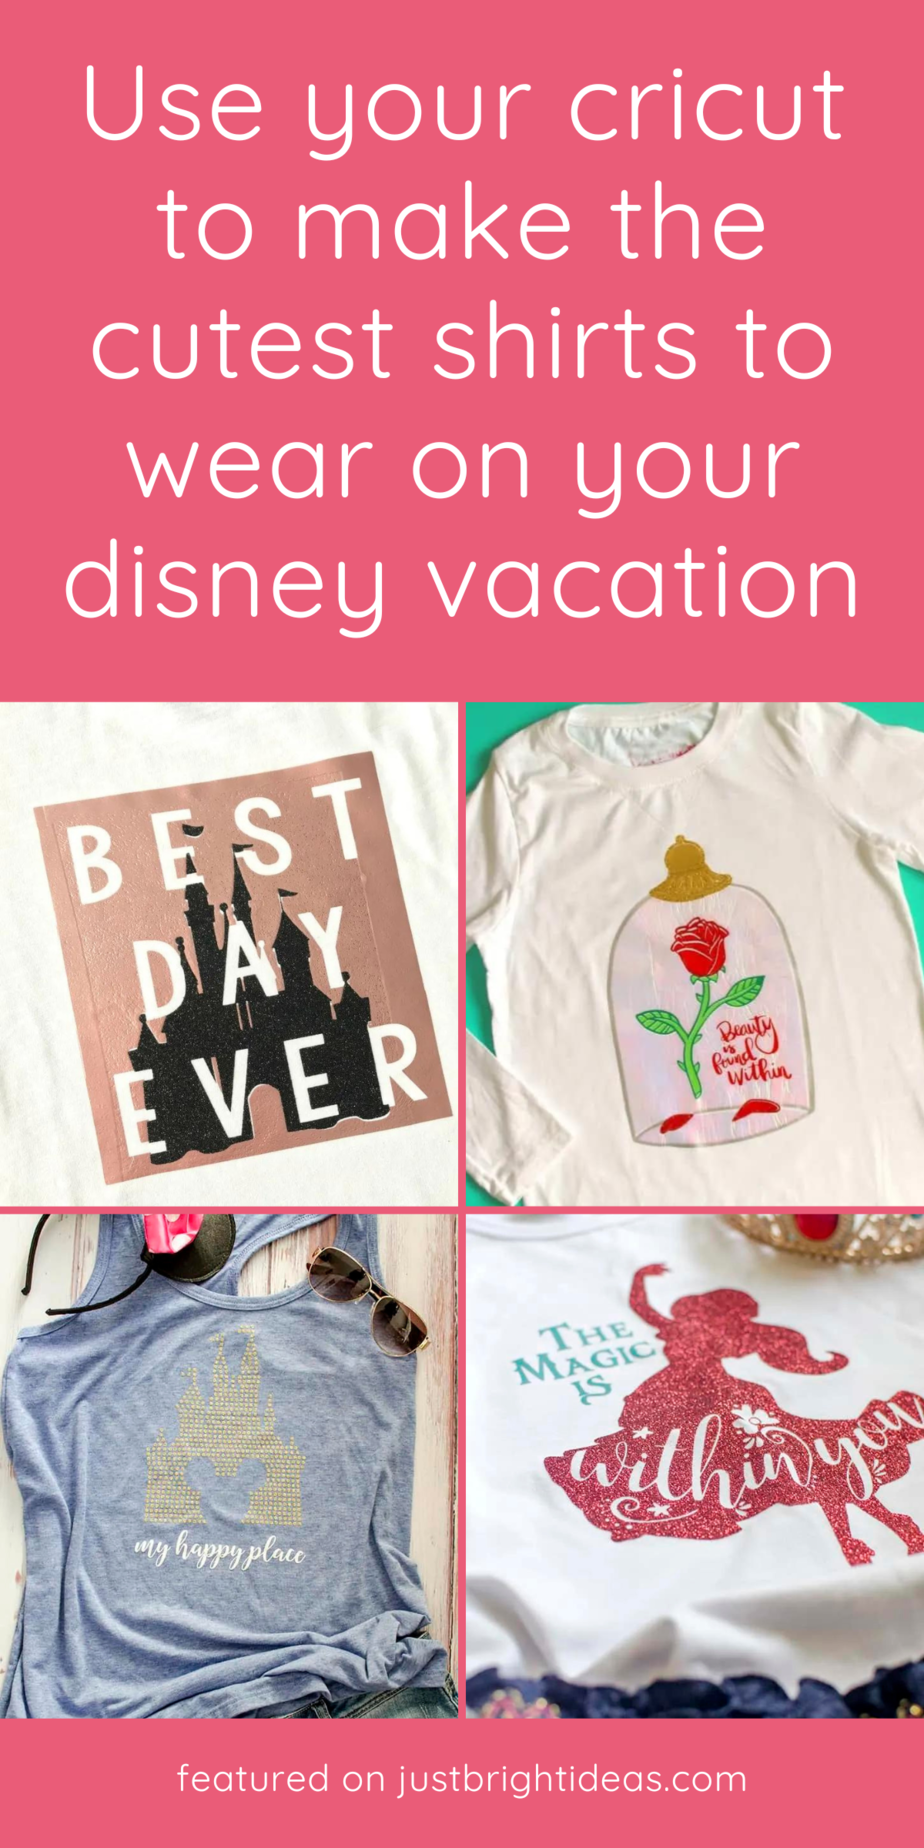 🎉✨ Get ready for your Disney vacation in style! 🏰👕 Check out our collection of free SVG files perfect for creating the cutest shirts with your Cricut! 🌟👚 From Mickey ears to magical quotes, we've got everything you need to make your trip extra special. 🐭❤️